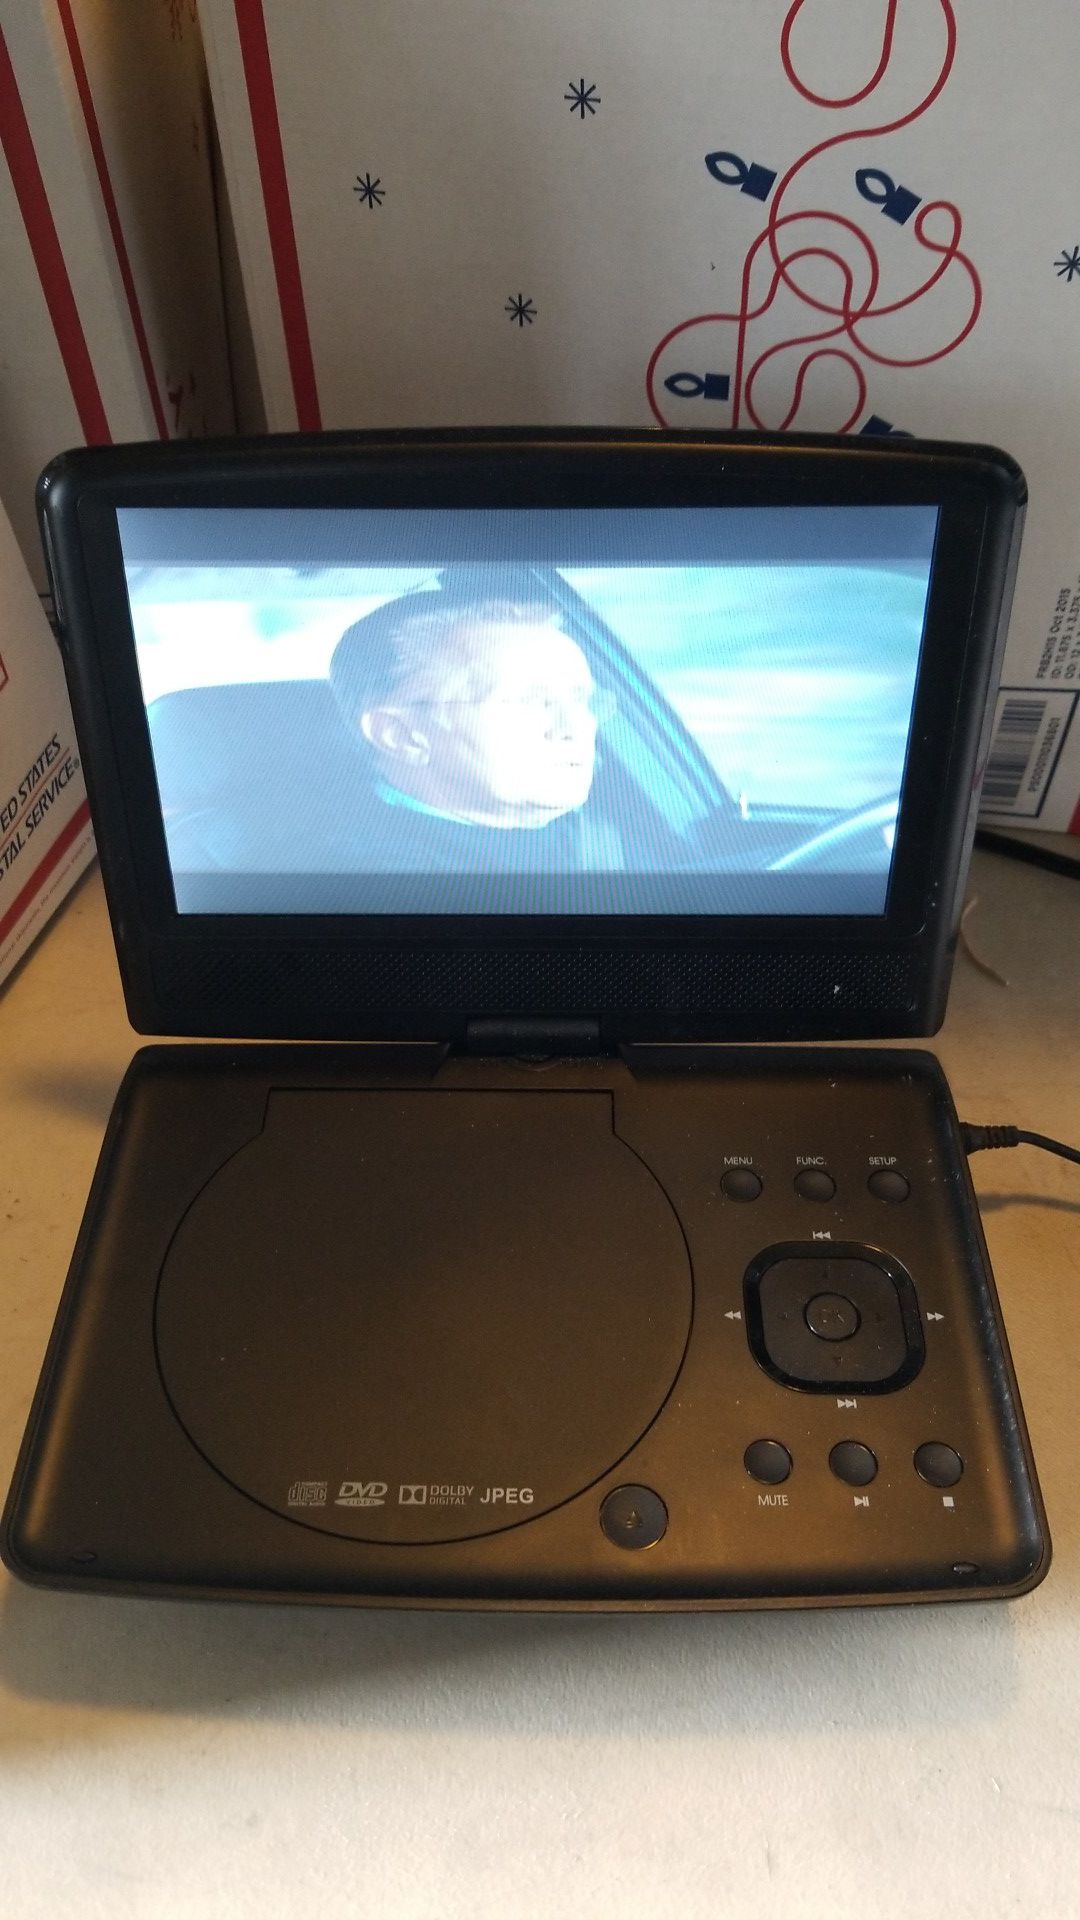 Portable DVD player works excellent